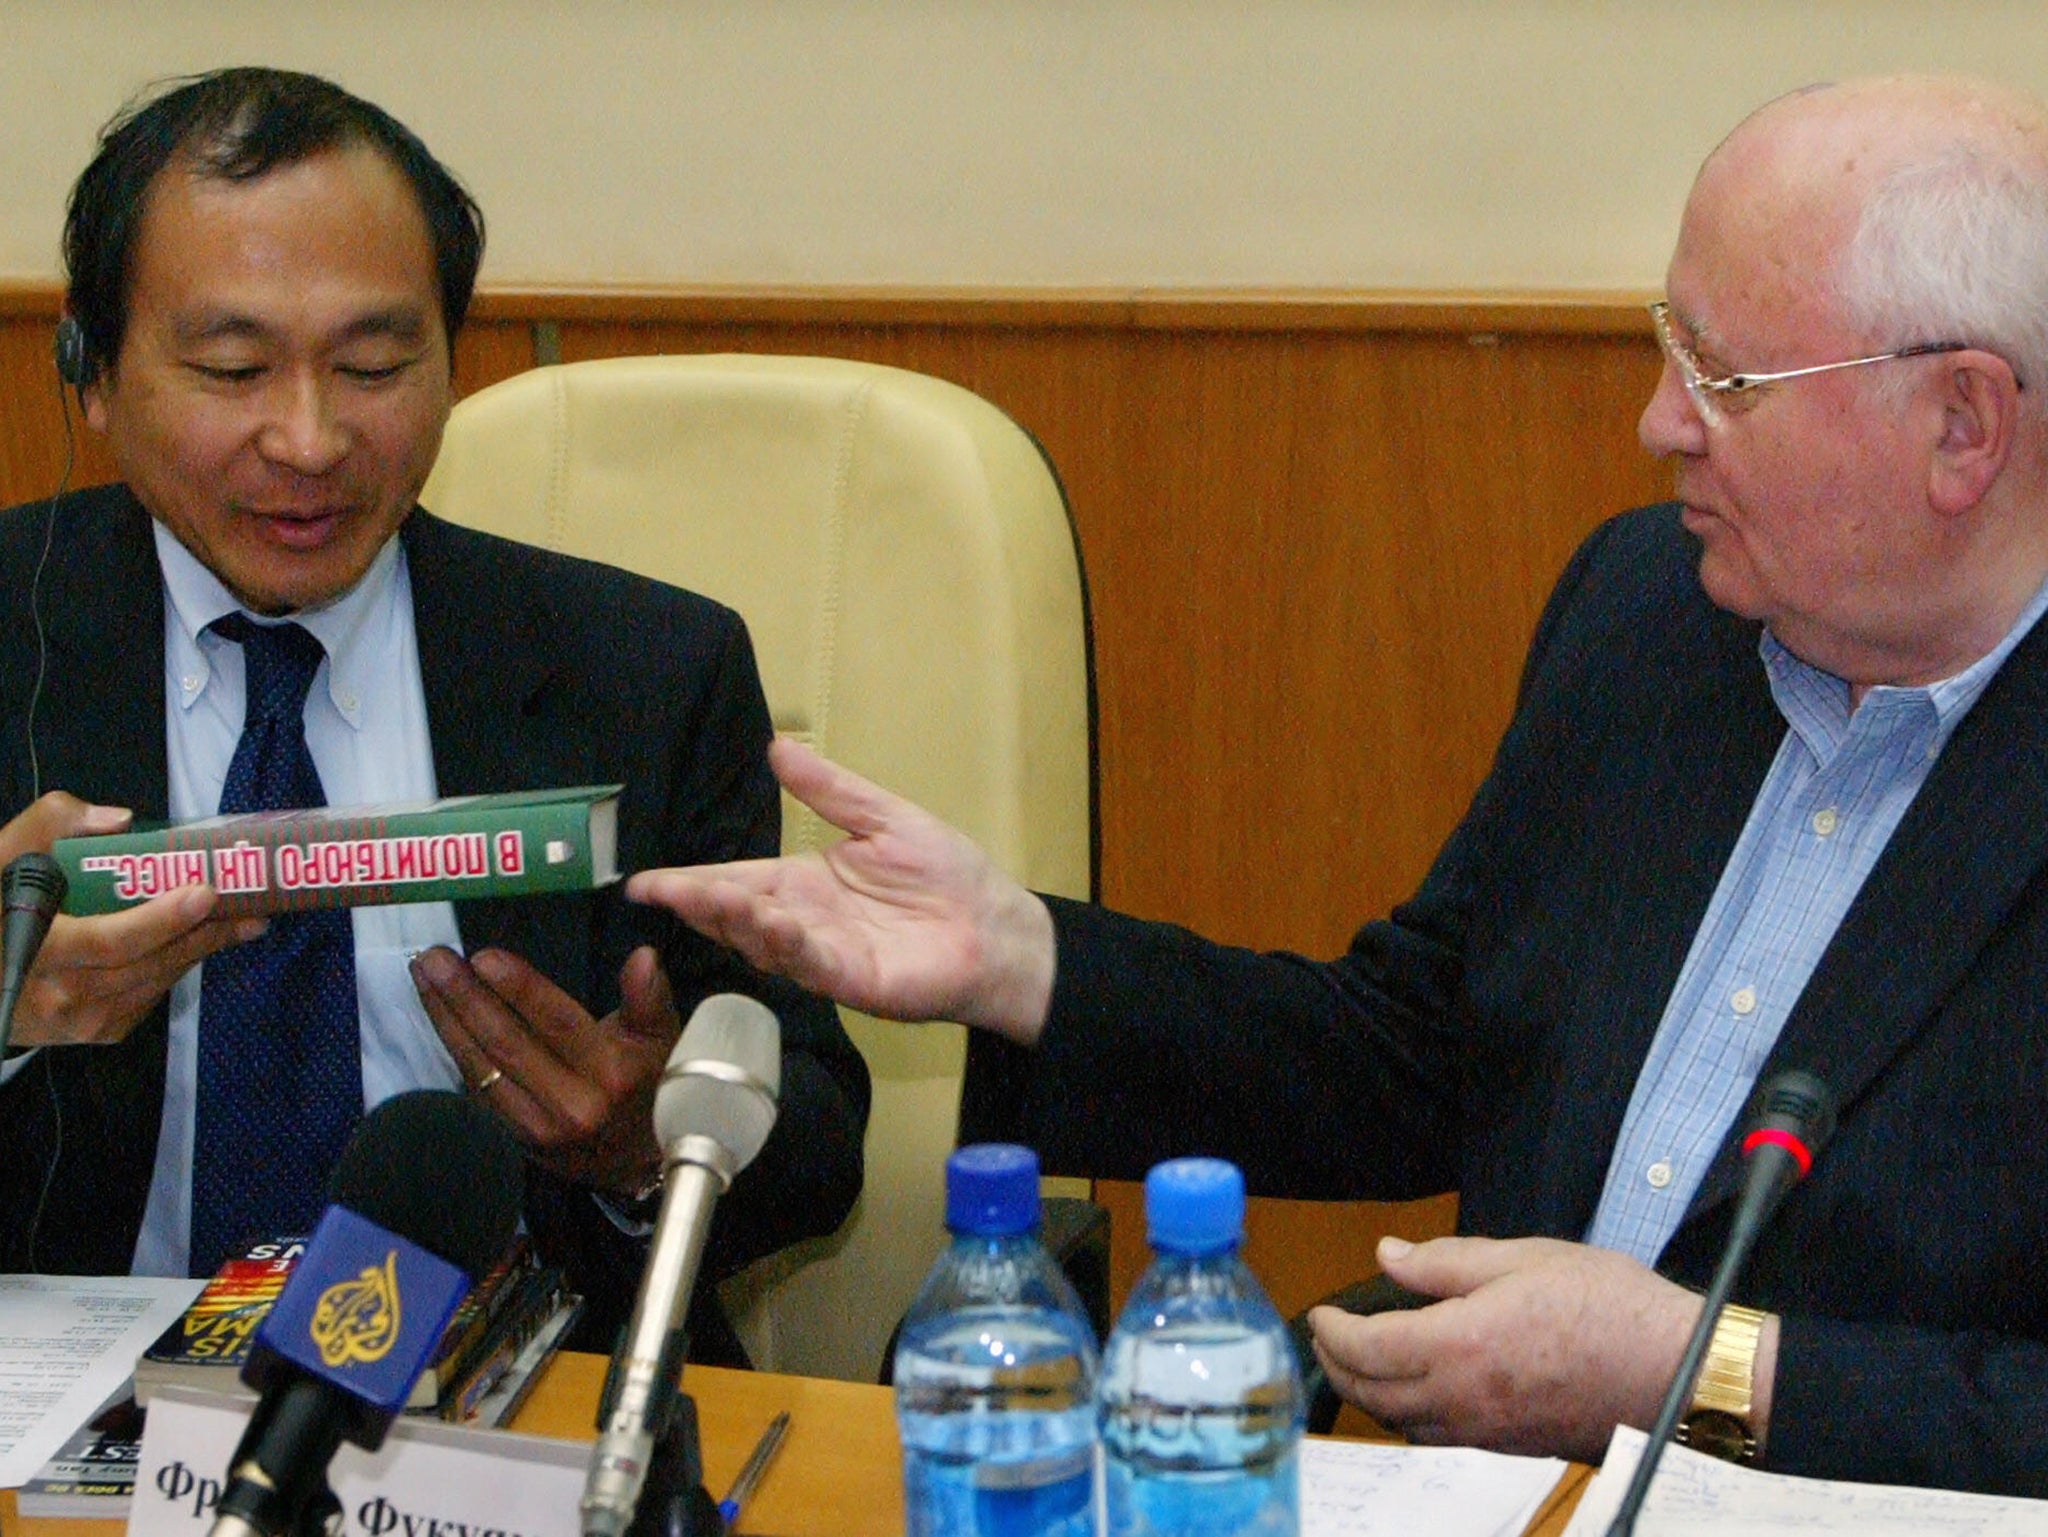 Former Soviet Union president Mikhail Gorbachev gives his book to Fukuyama?during a conference in Moscow (AFP/Getty)